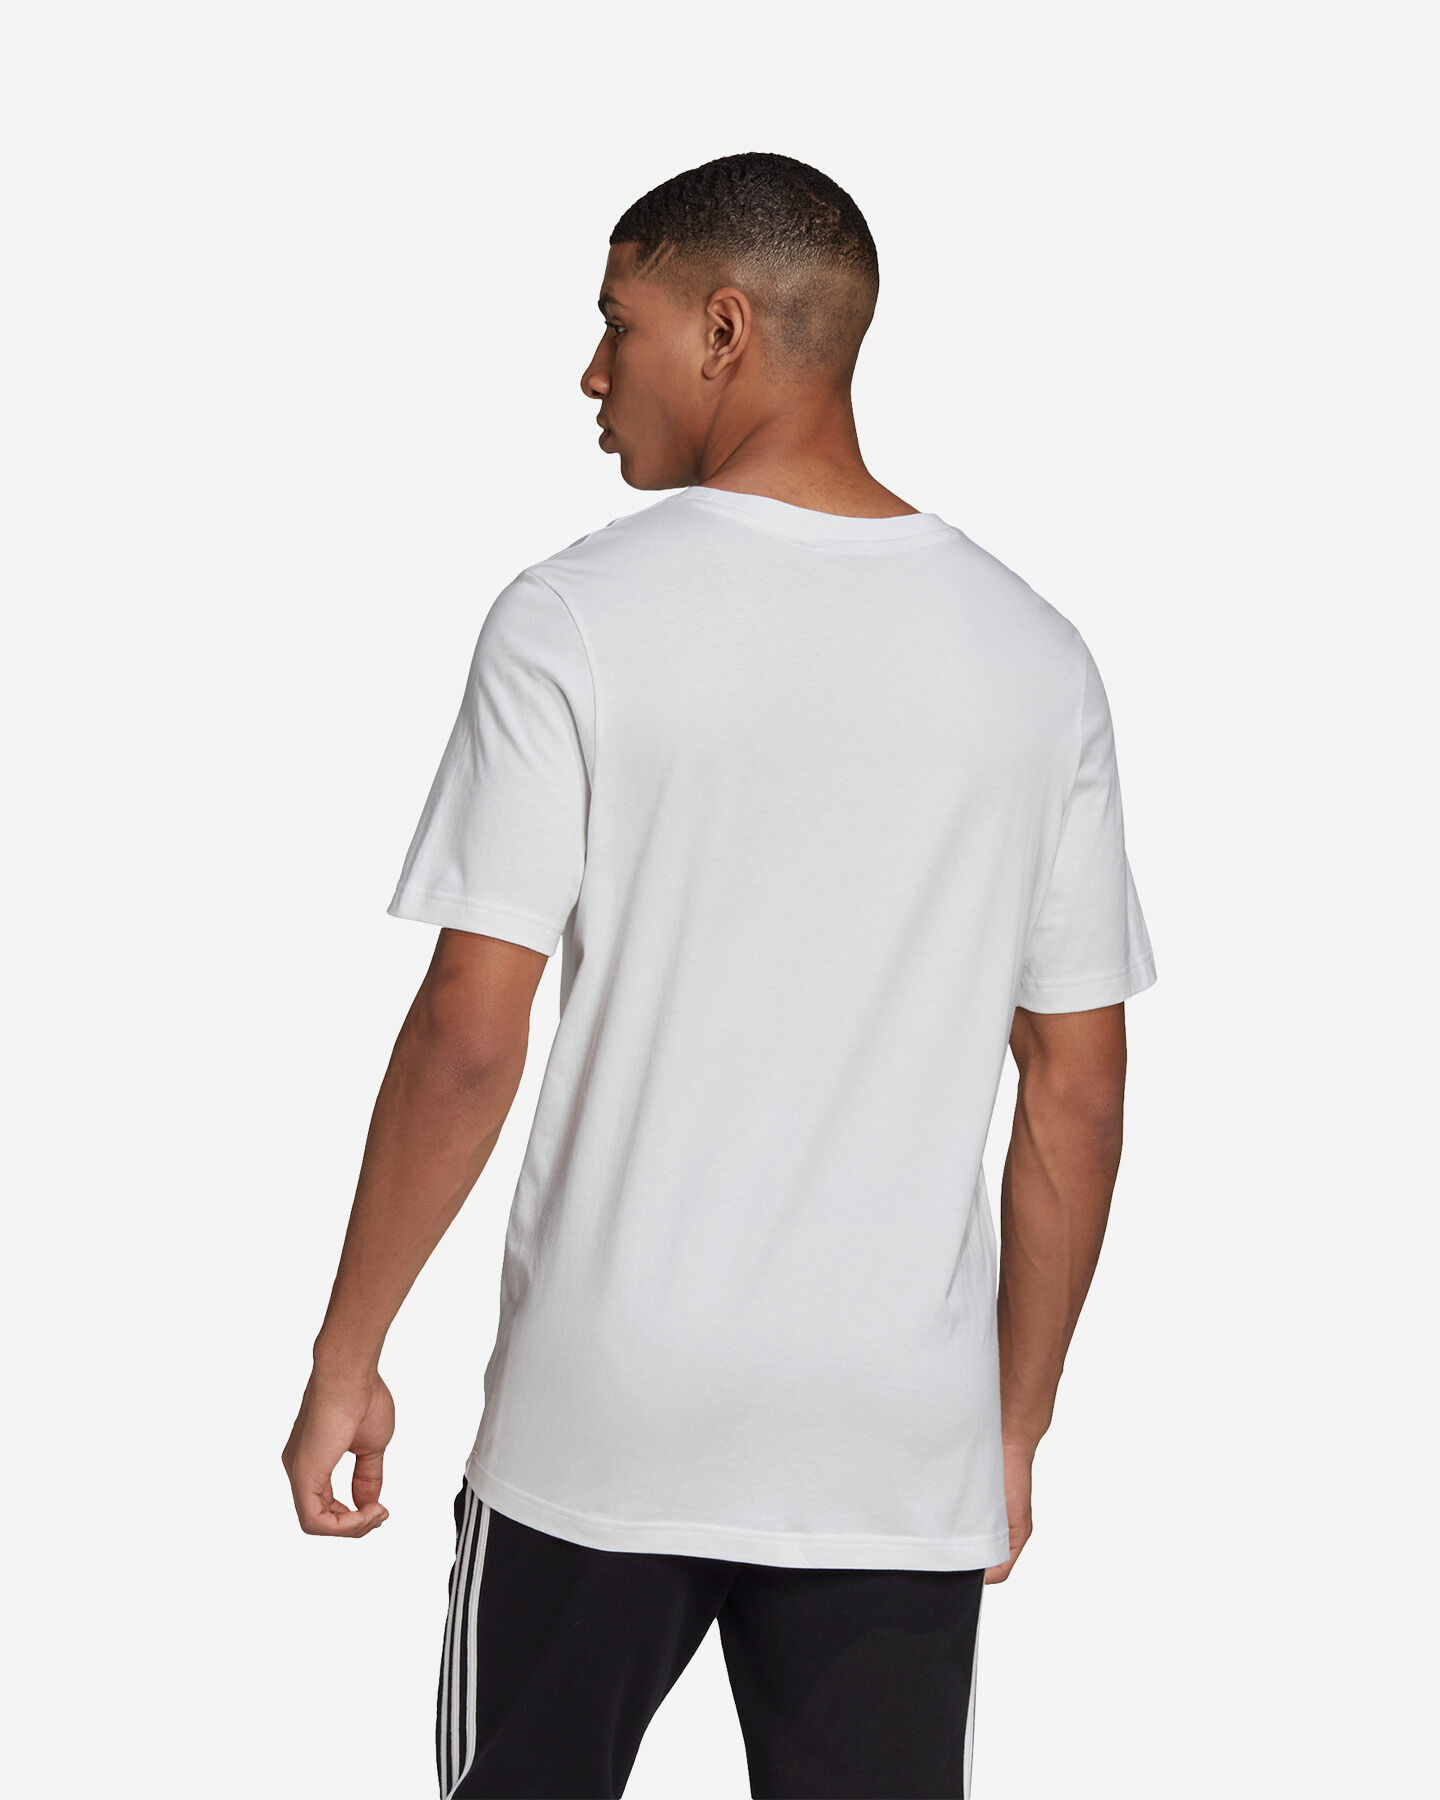  T-Shirt ADIDAS OUTLINE M S5210669|UNI|XS scatto 4